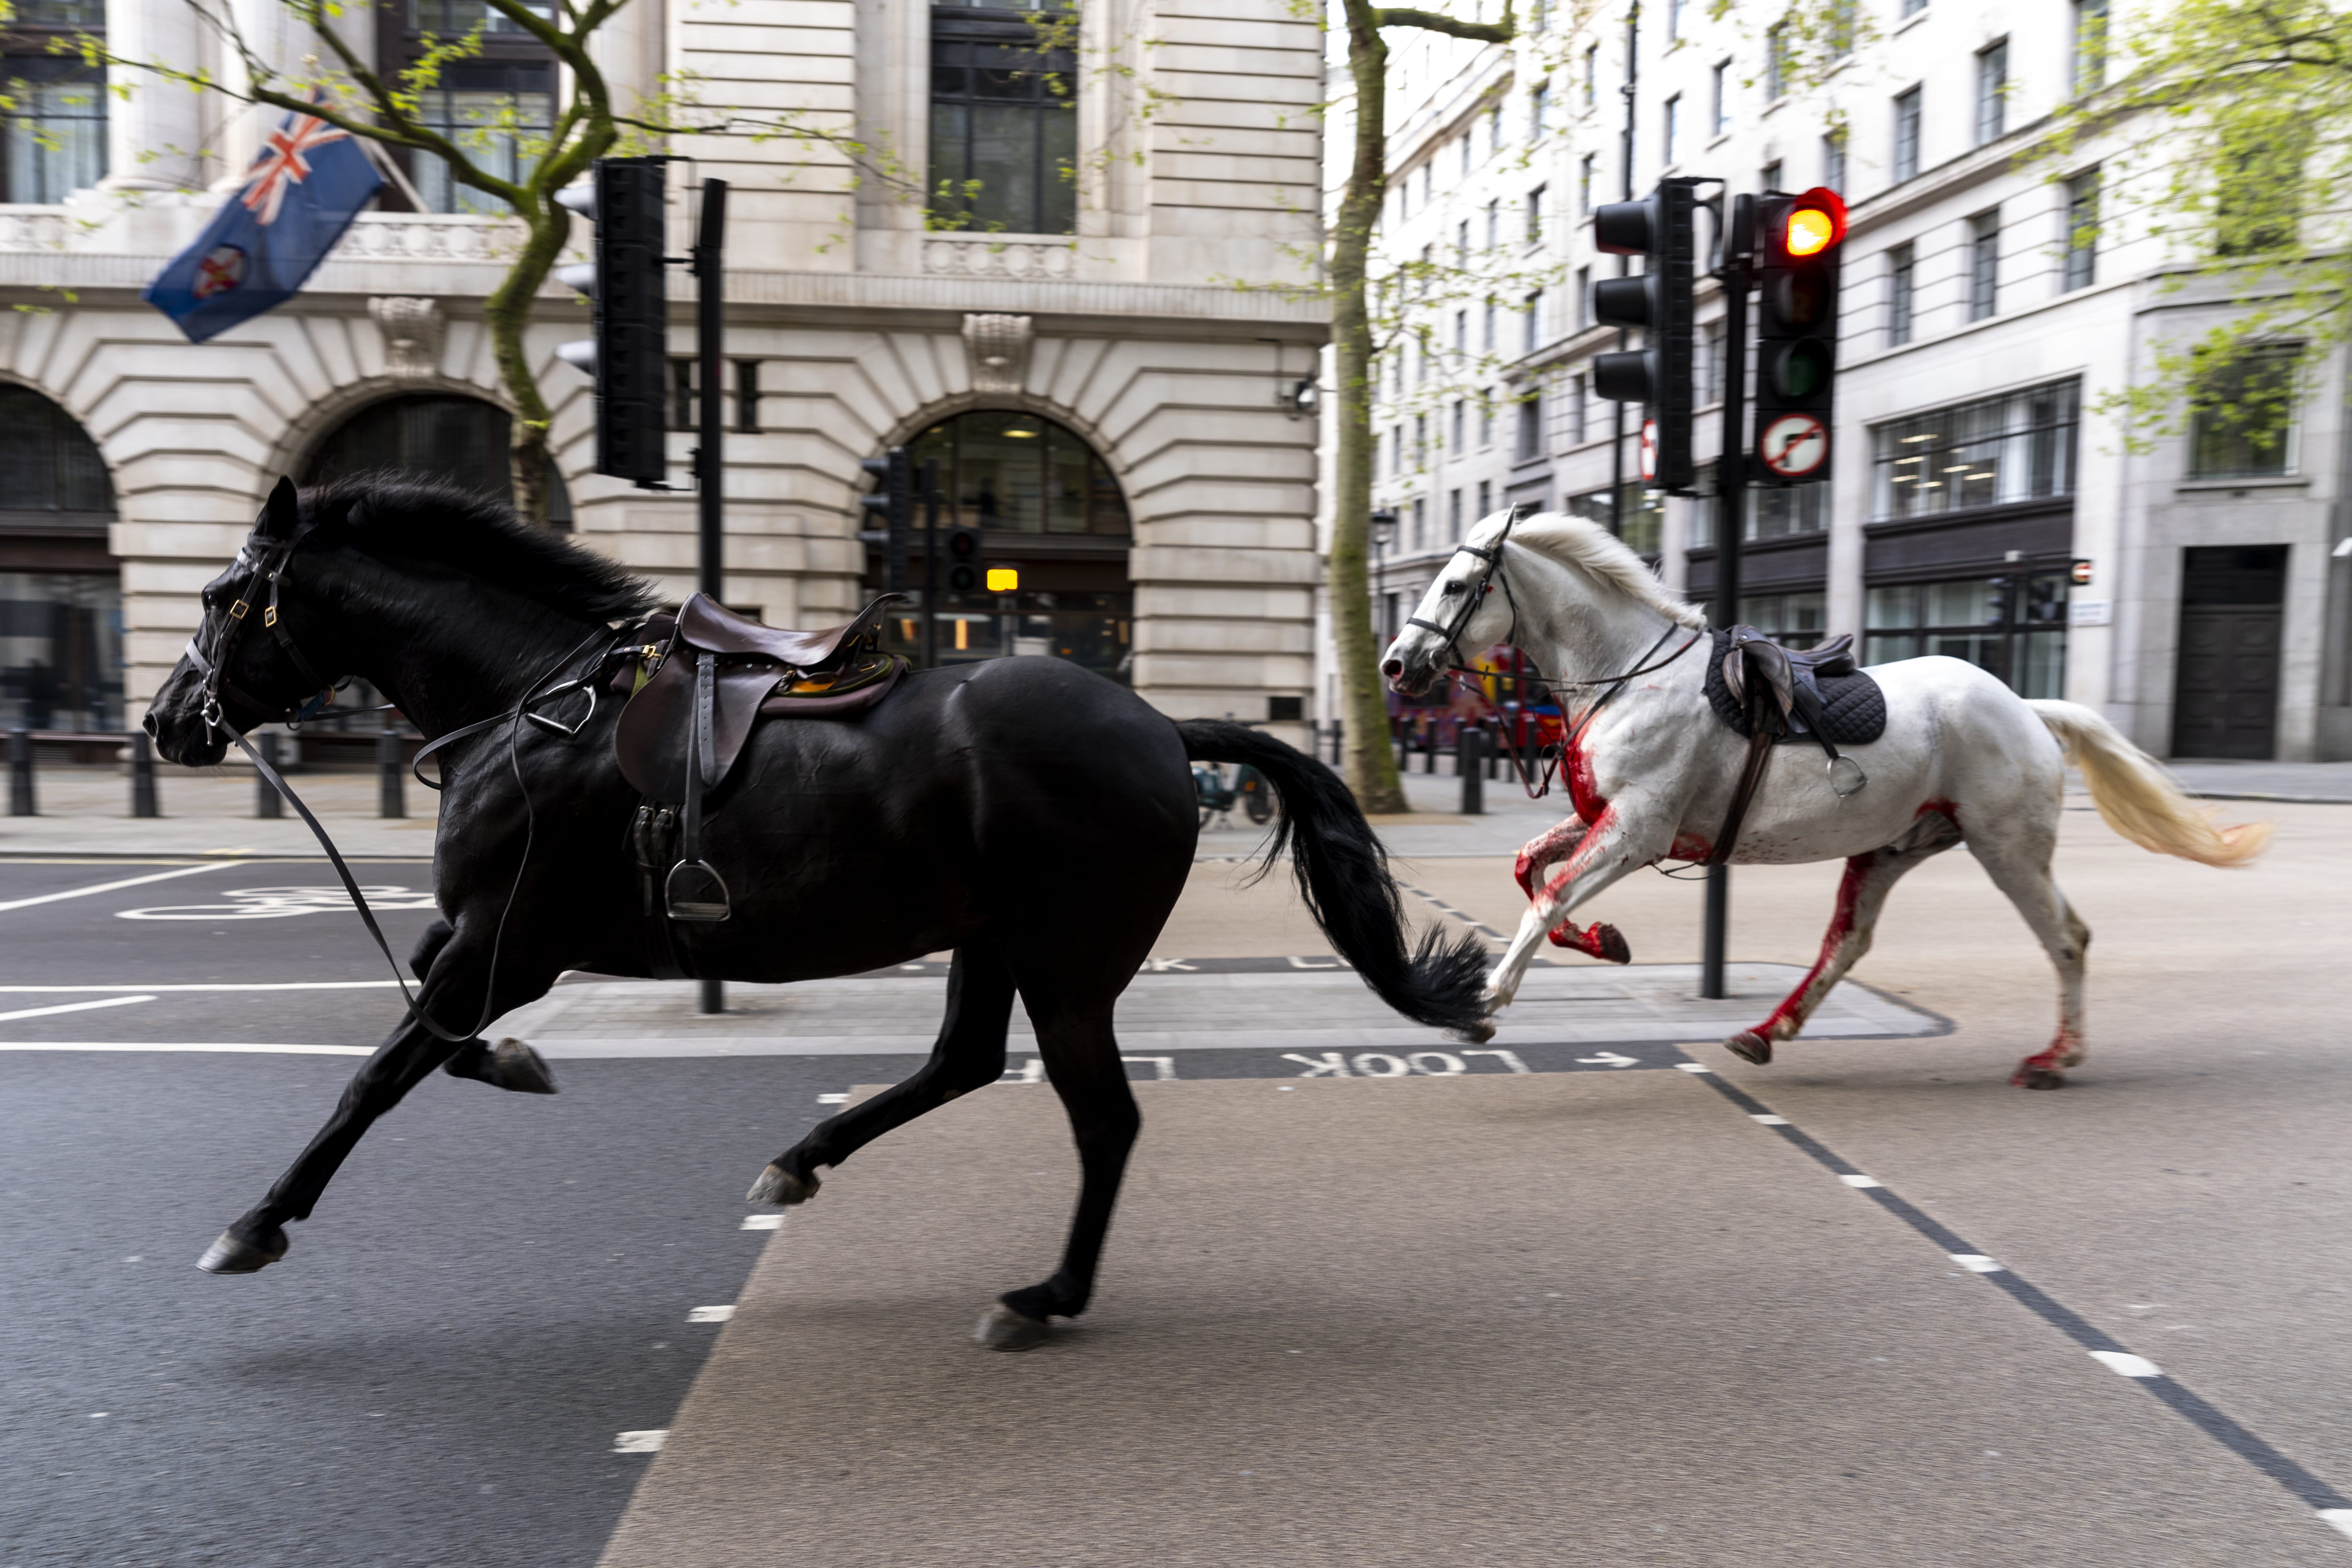 Household Cavalry horses bolt through the streets of London